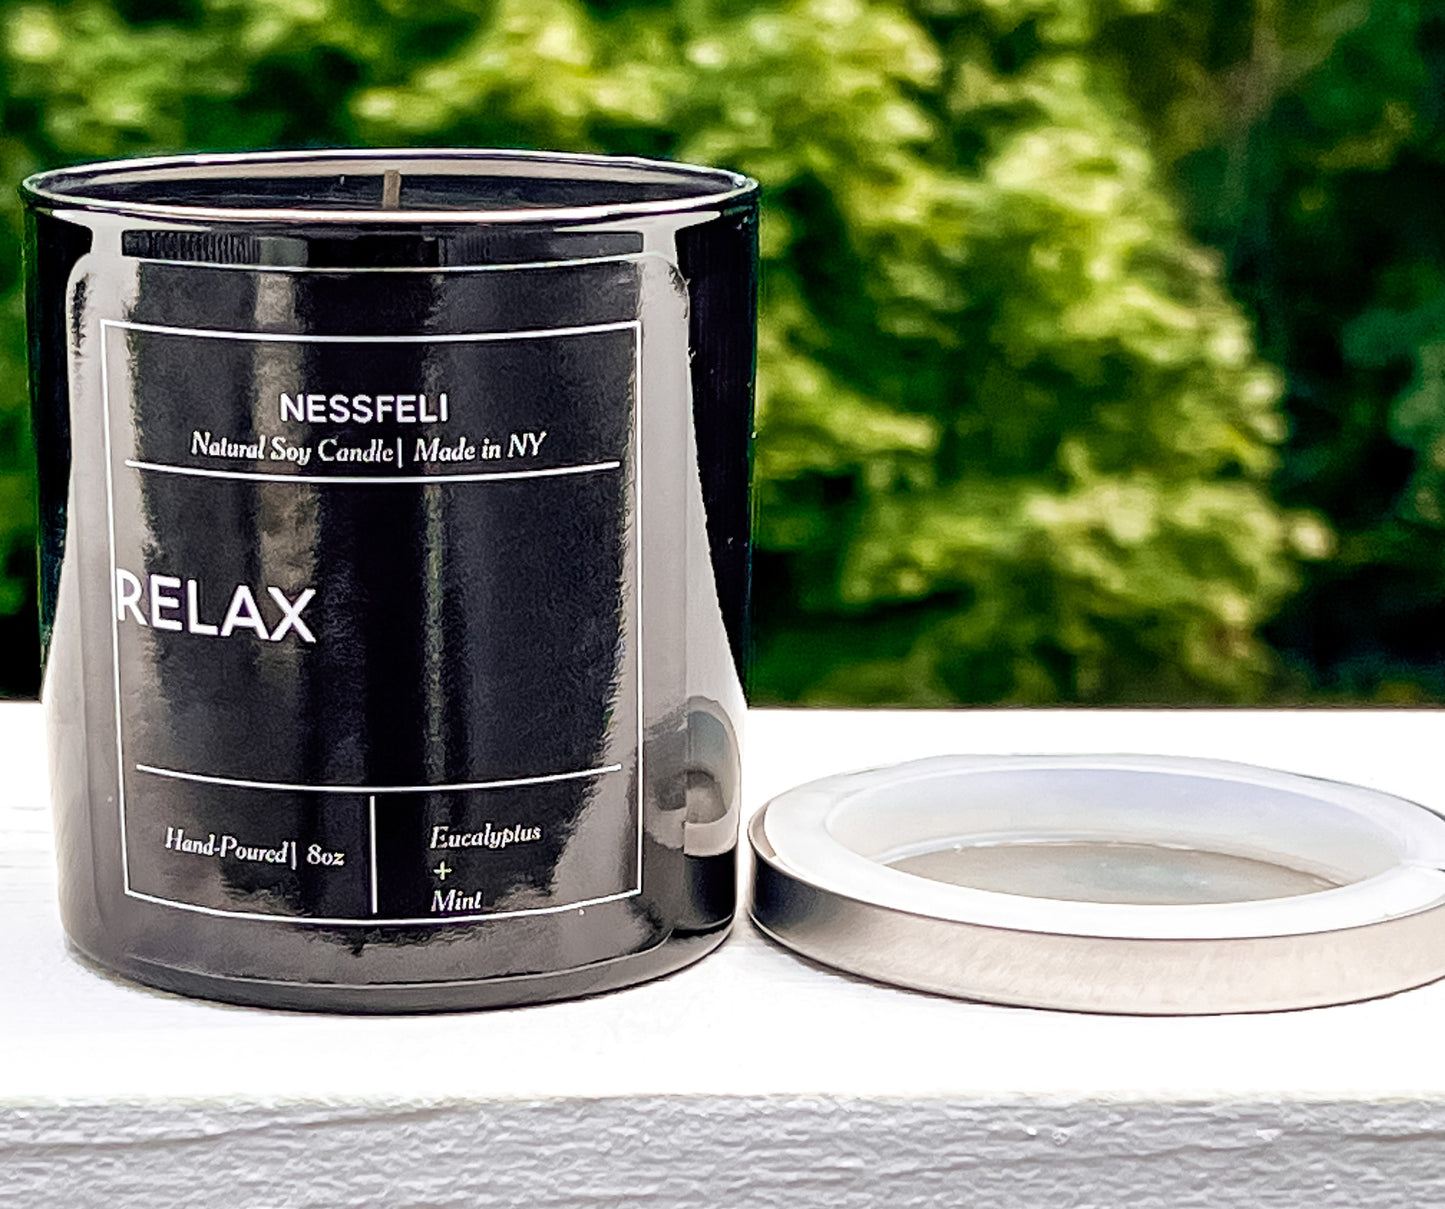 Relax- Eucalyptus and Mint